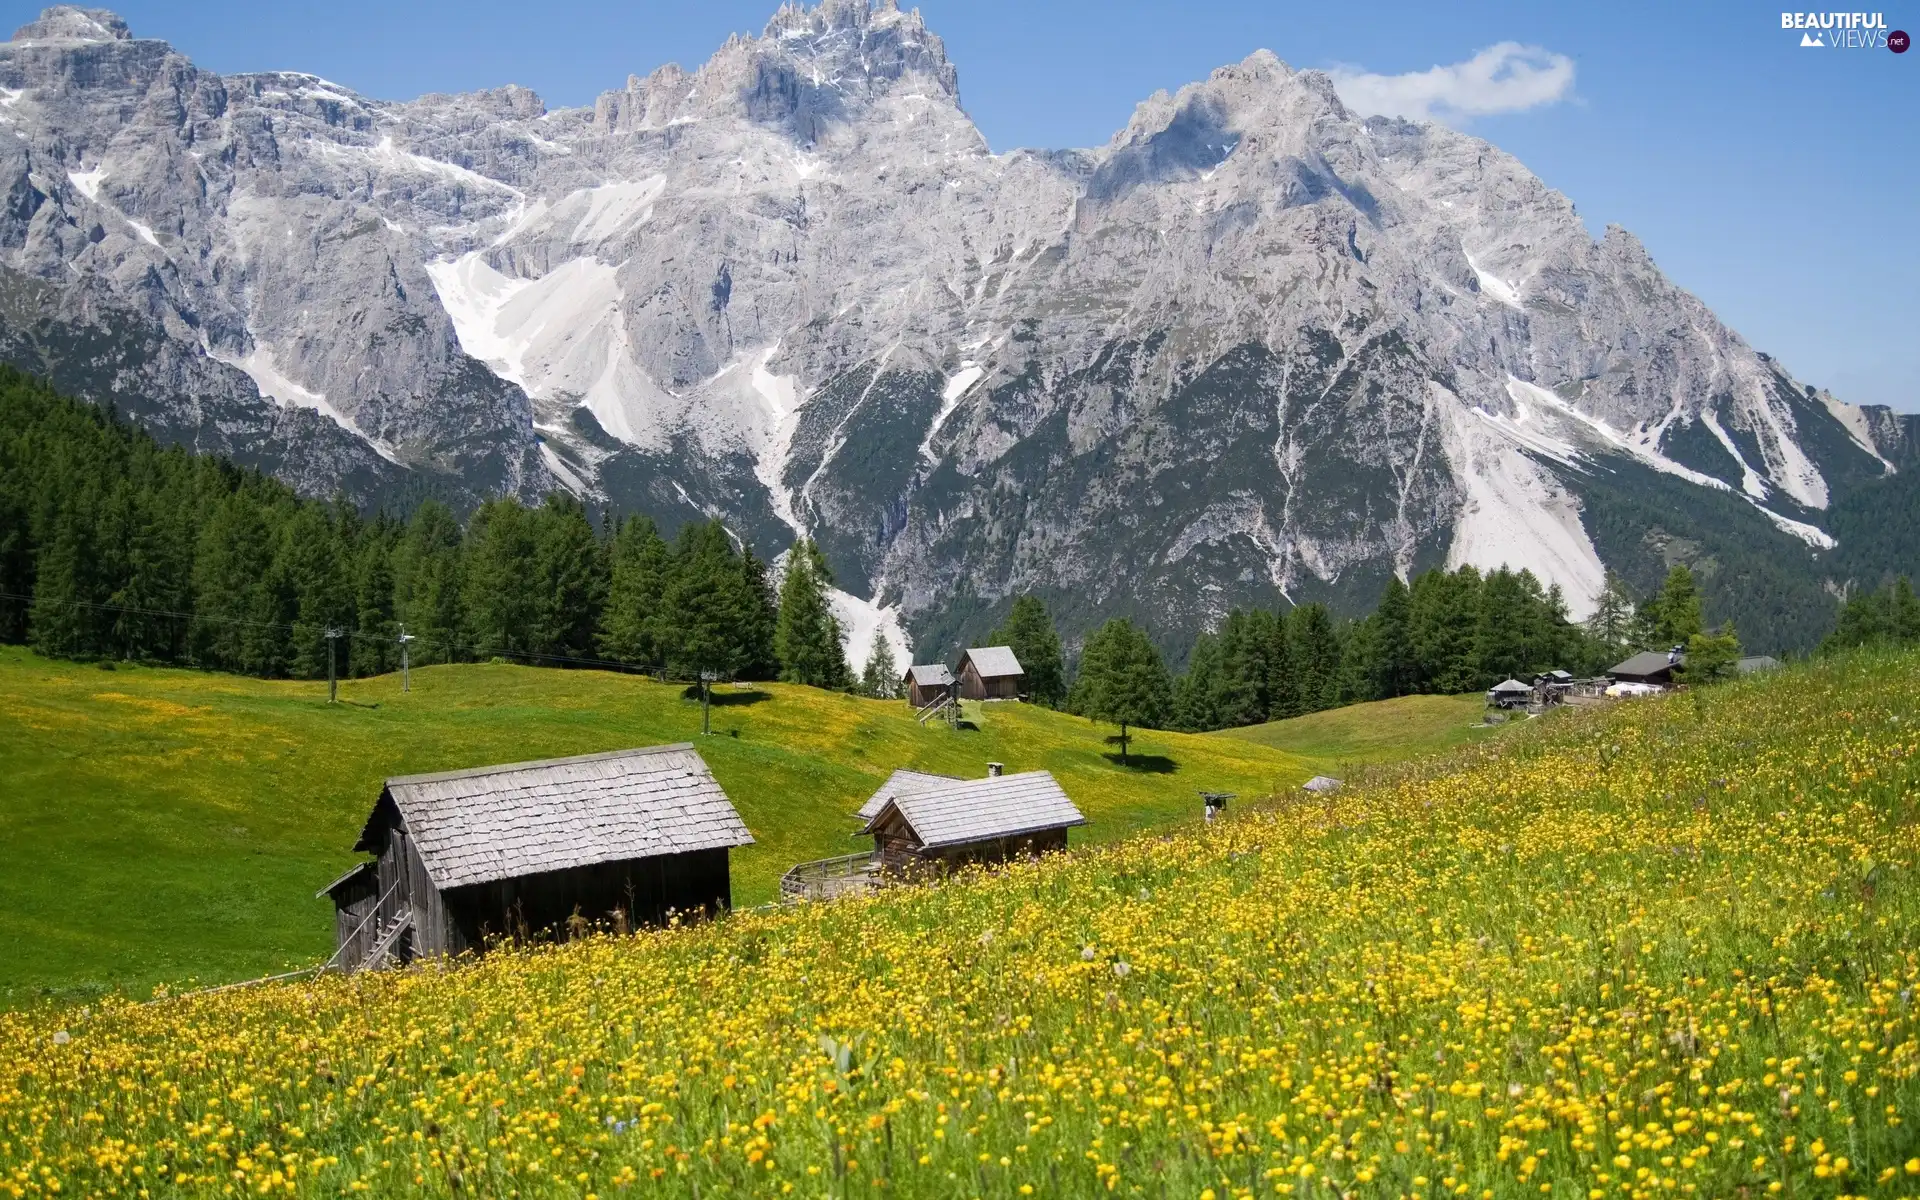 Mountains, Meadow, Sheds